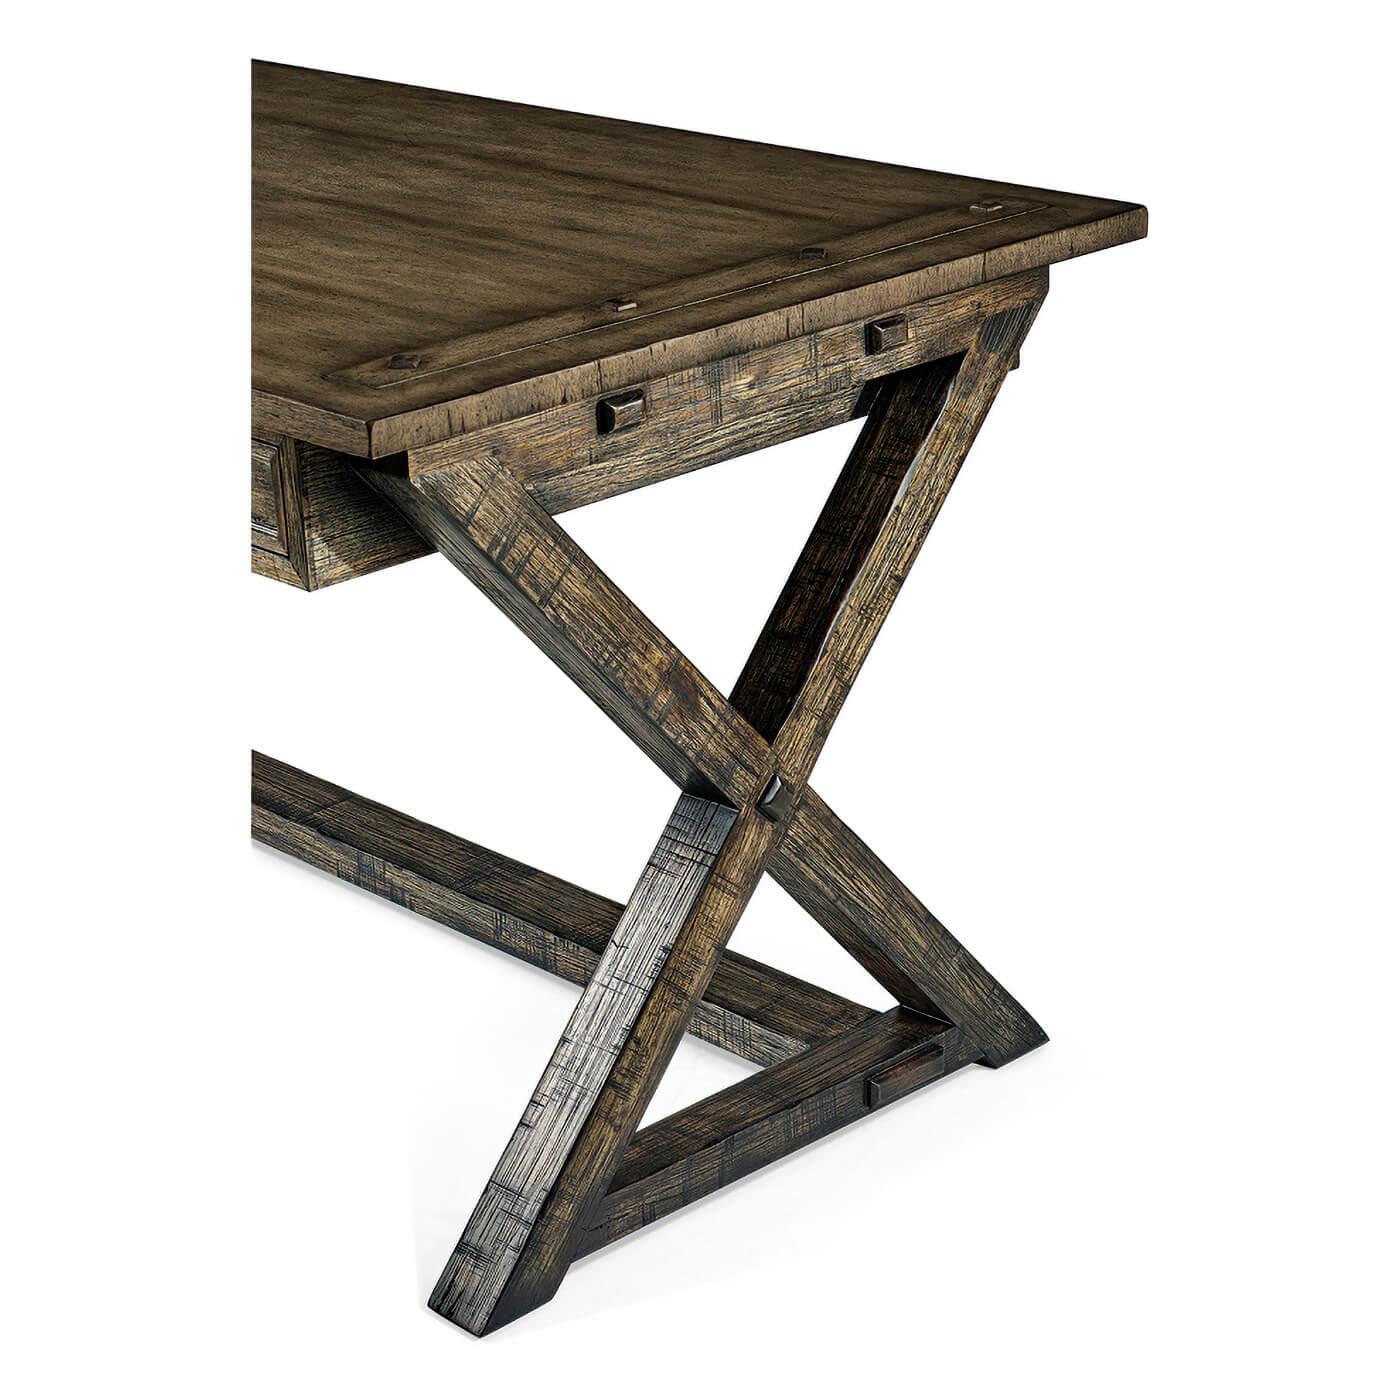 Vietnamese Rustic Country Walnut Desk, Driftwood Finish For Sale